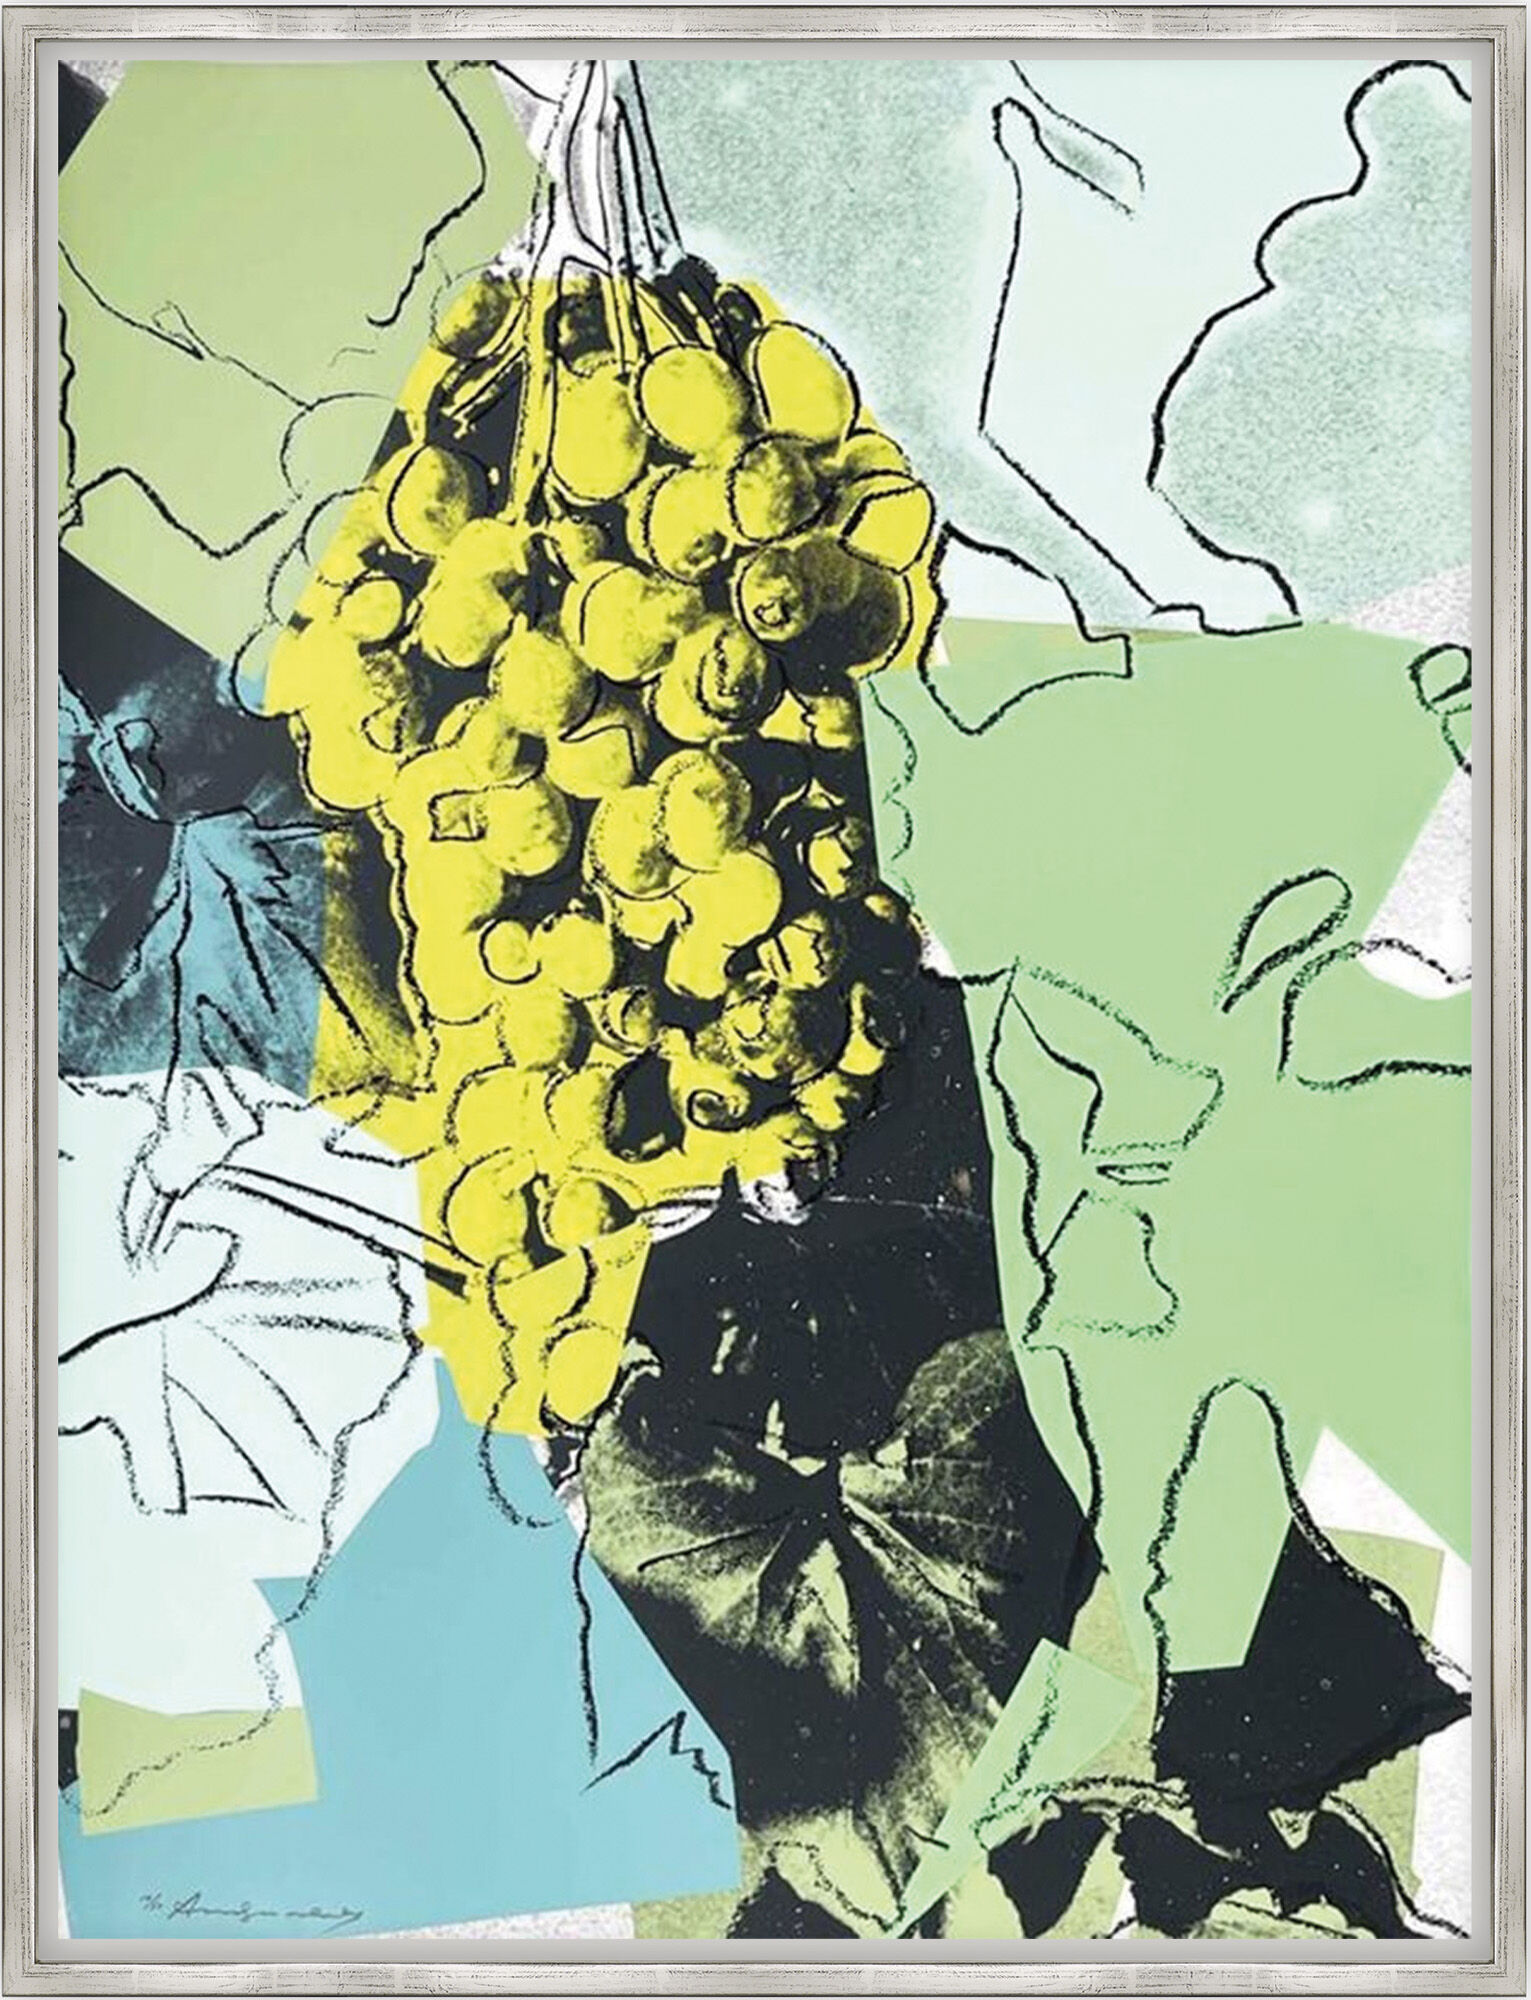 Picture "Grapes (FS II.191)" (1979) by Andy Warhol